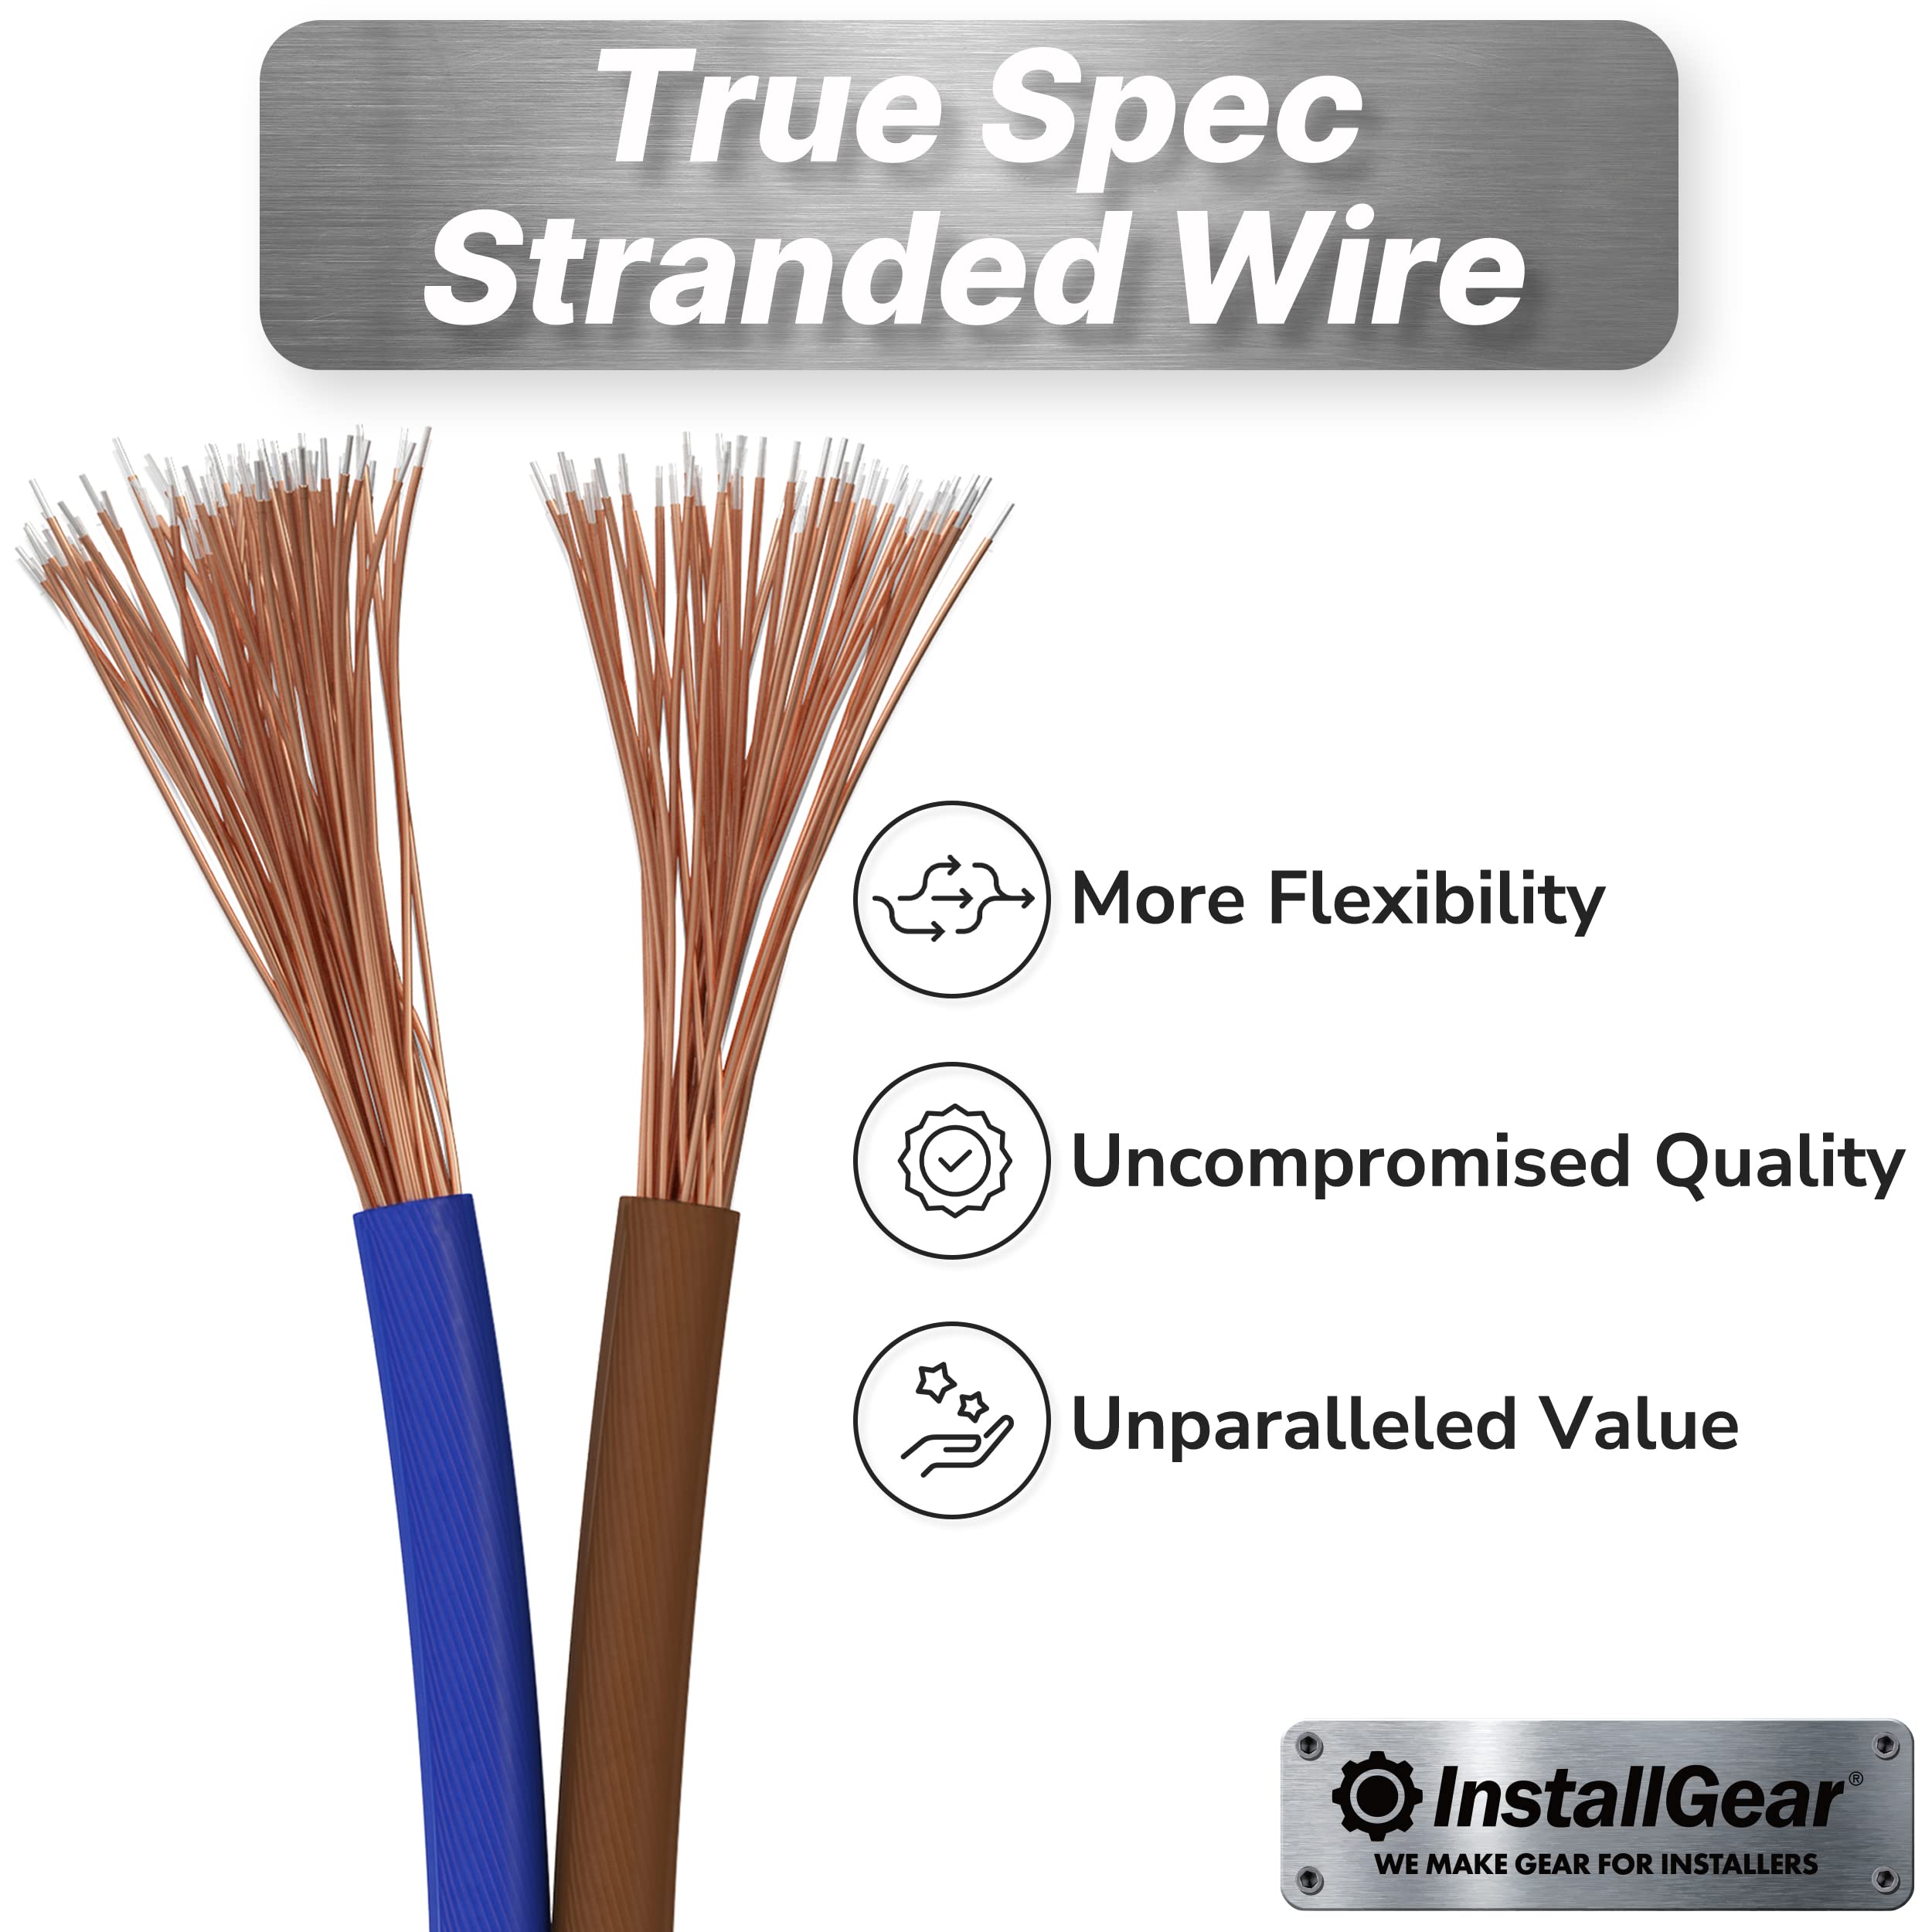 InstallGear 14 Gauge Speaker Wire Cable (100 Feet), 14 AWG Speaker Wire Cable, True Spec Soft Touch Cables | Great Use for Car Speakers Stereos, Home Theater Speakers, Surround Sound, Radio Wires